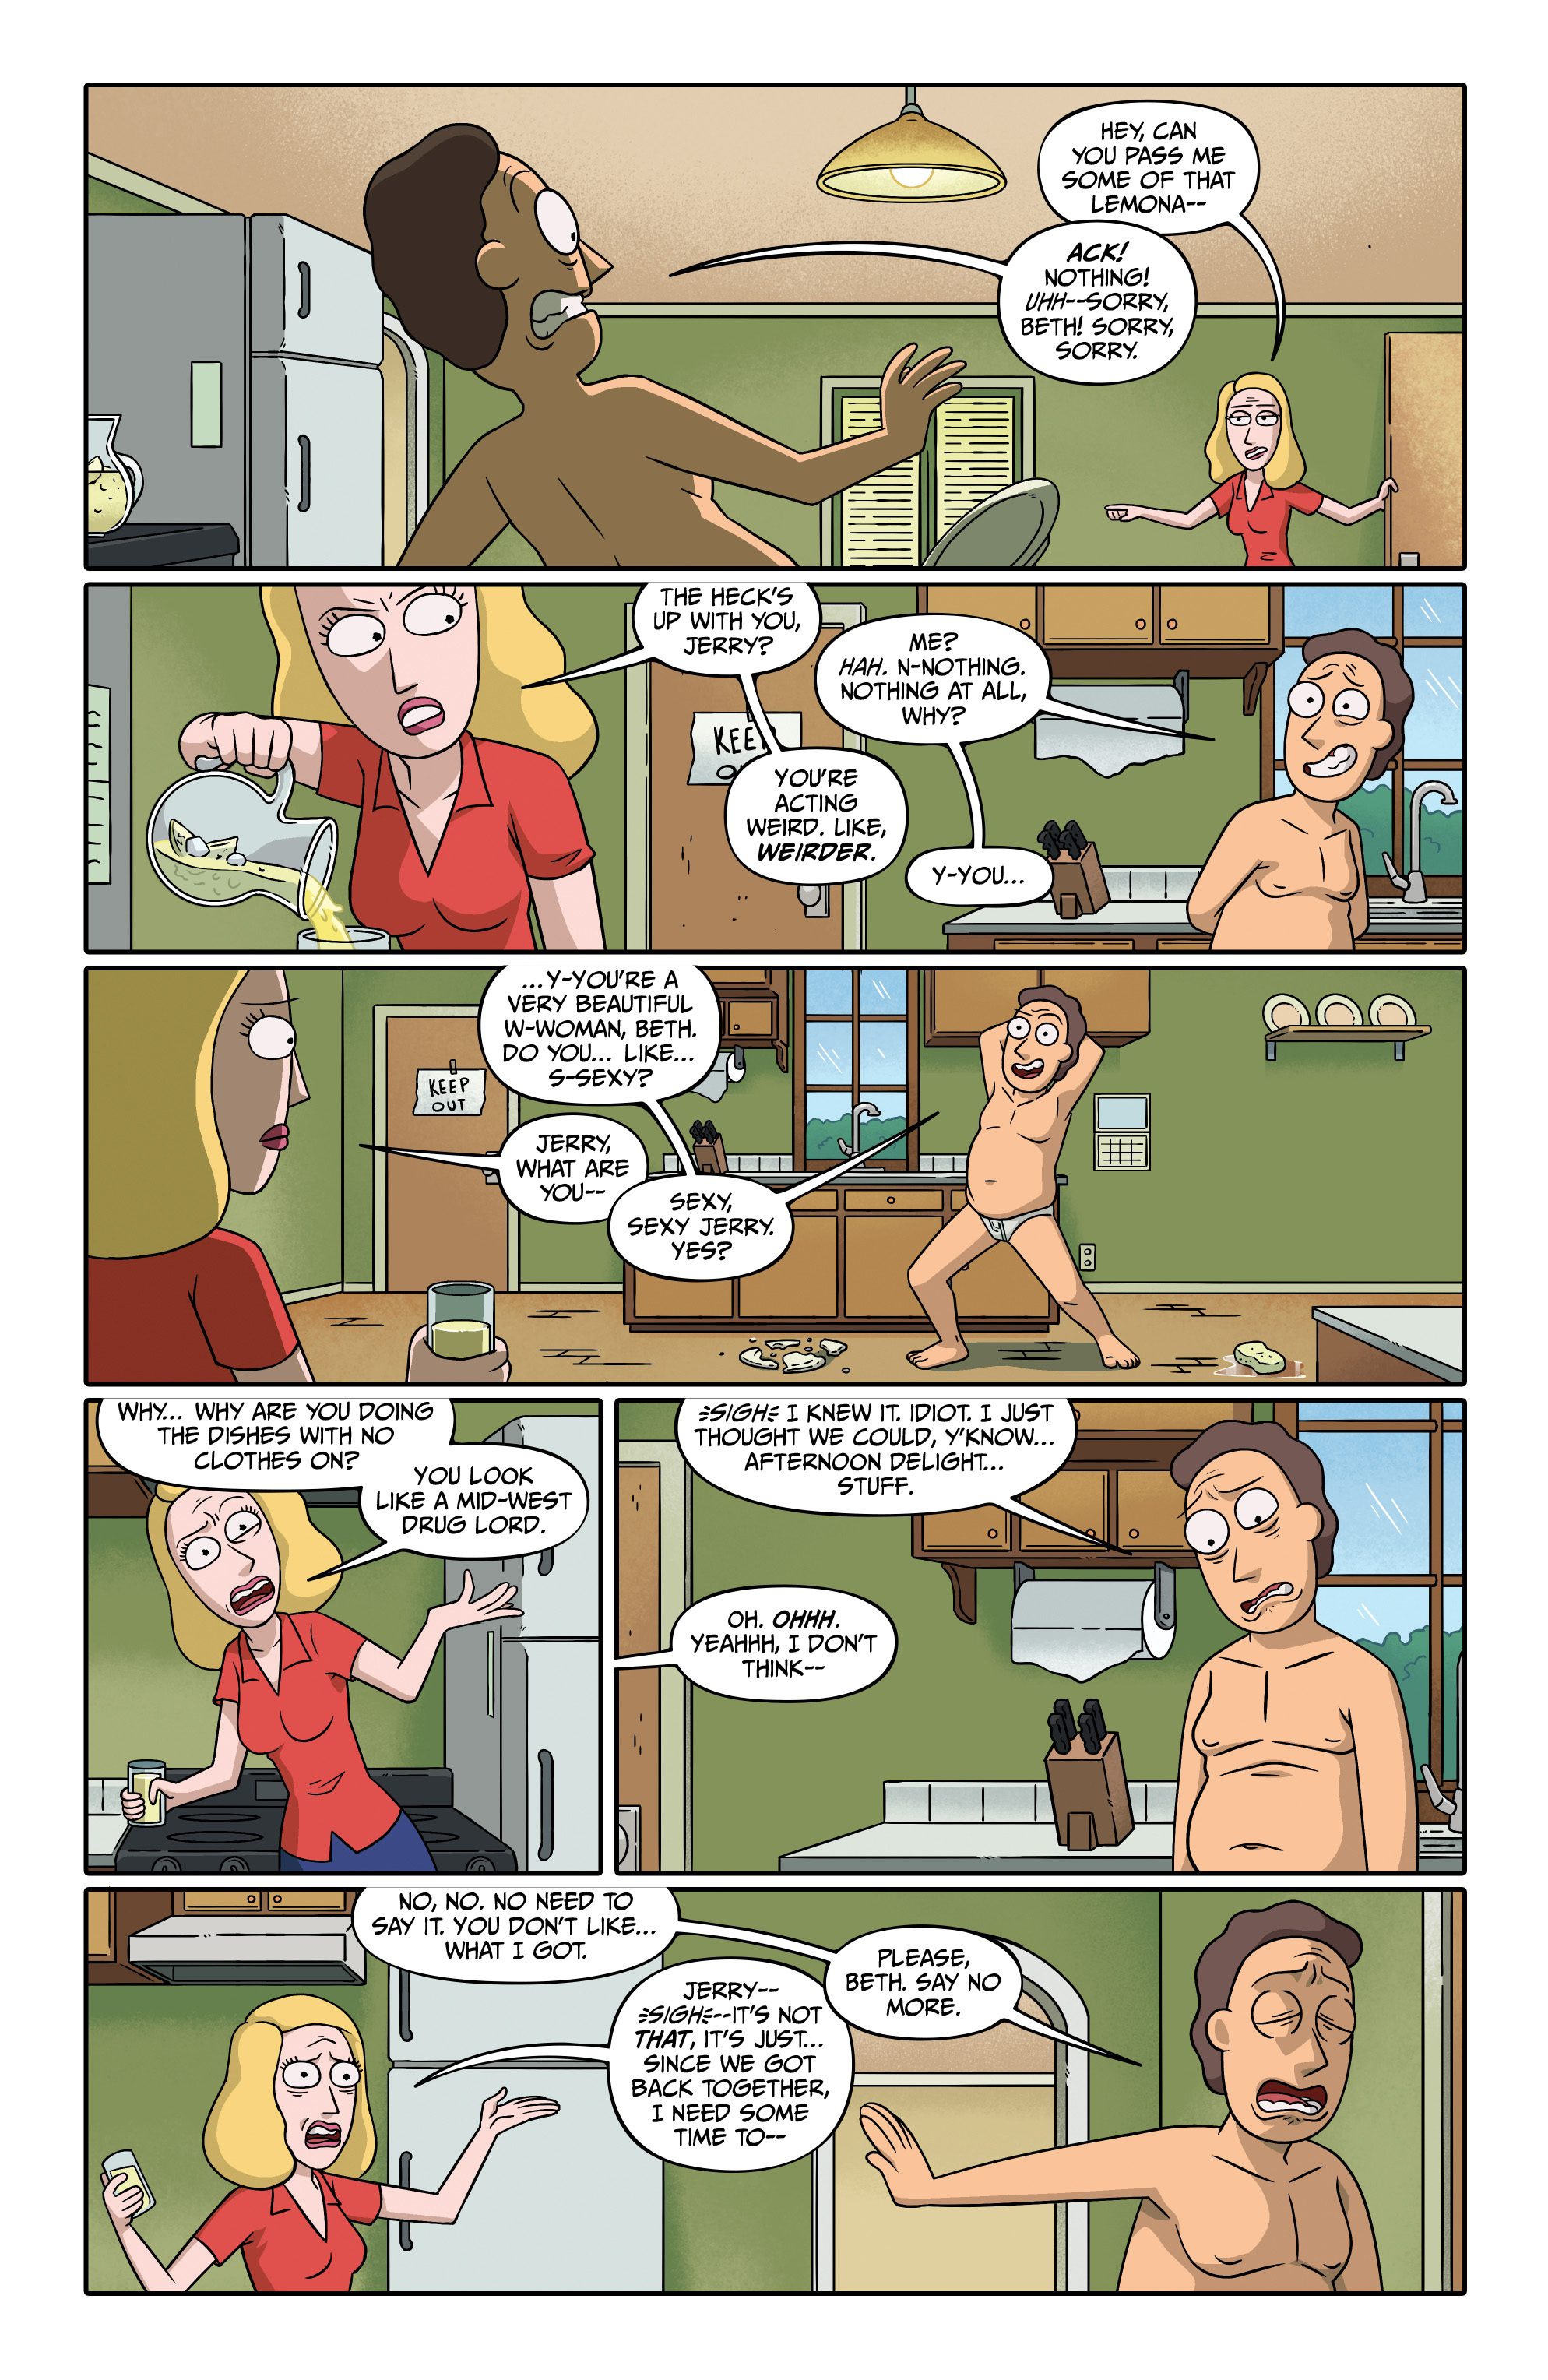 Rick and Morty Presents (2018-): Chapter 5 - Page 4